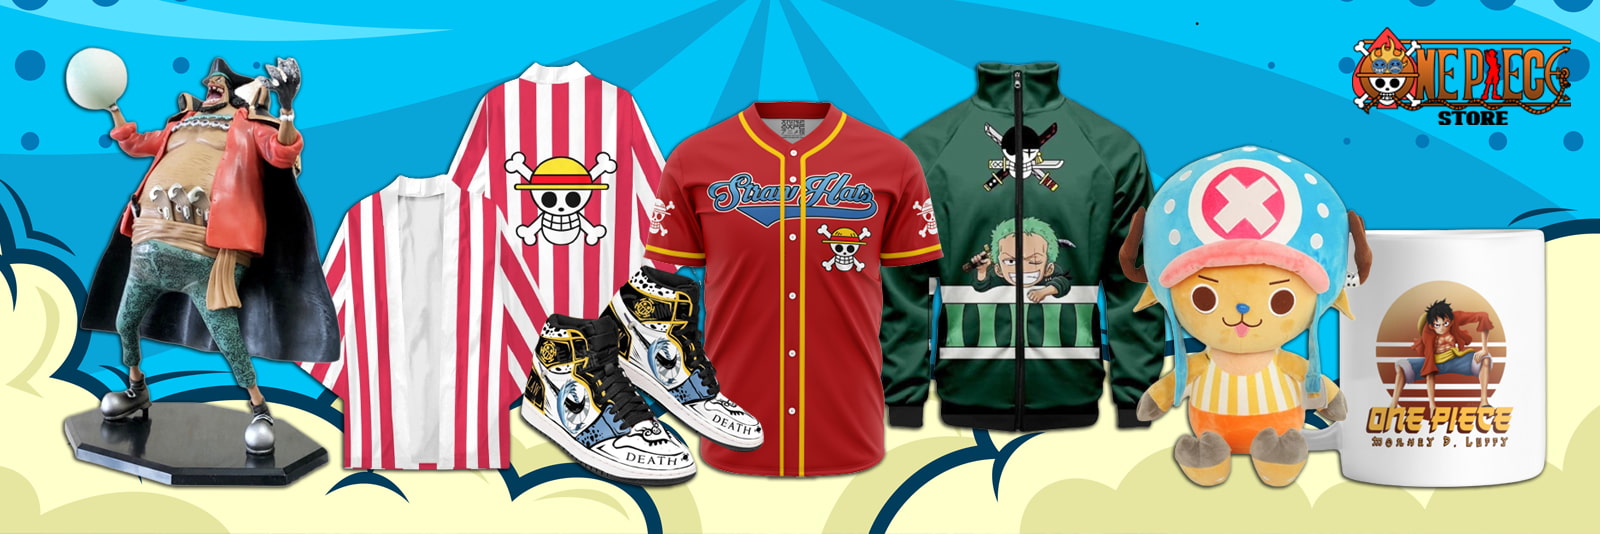 One Piece Merch & Gifts - OFFICIAL One Piece Store